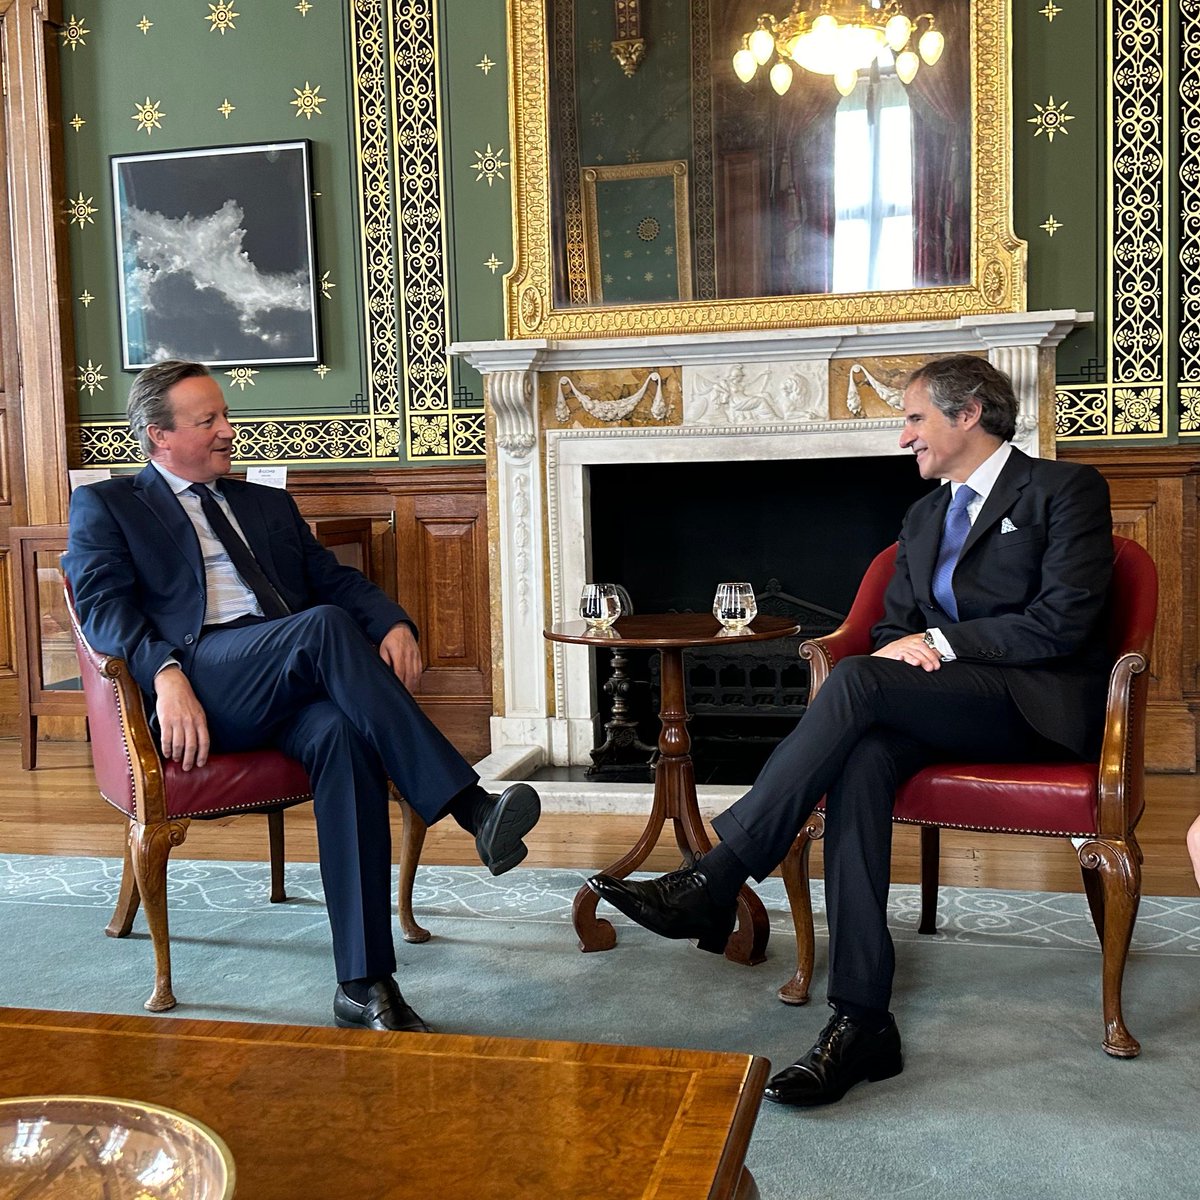 The UK 🇬🇧 is an indispensable @IAEAorg partner. Important to have substantive exchange with @FCDOGovUK’s Foreign Secretary @David_Cameron on the Agency's work for the safety and security of ZNPP, global nonproliferation efforts, #AUKUS, and peaceful uses of nuclear technology.